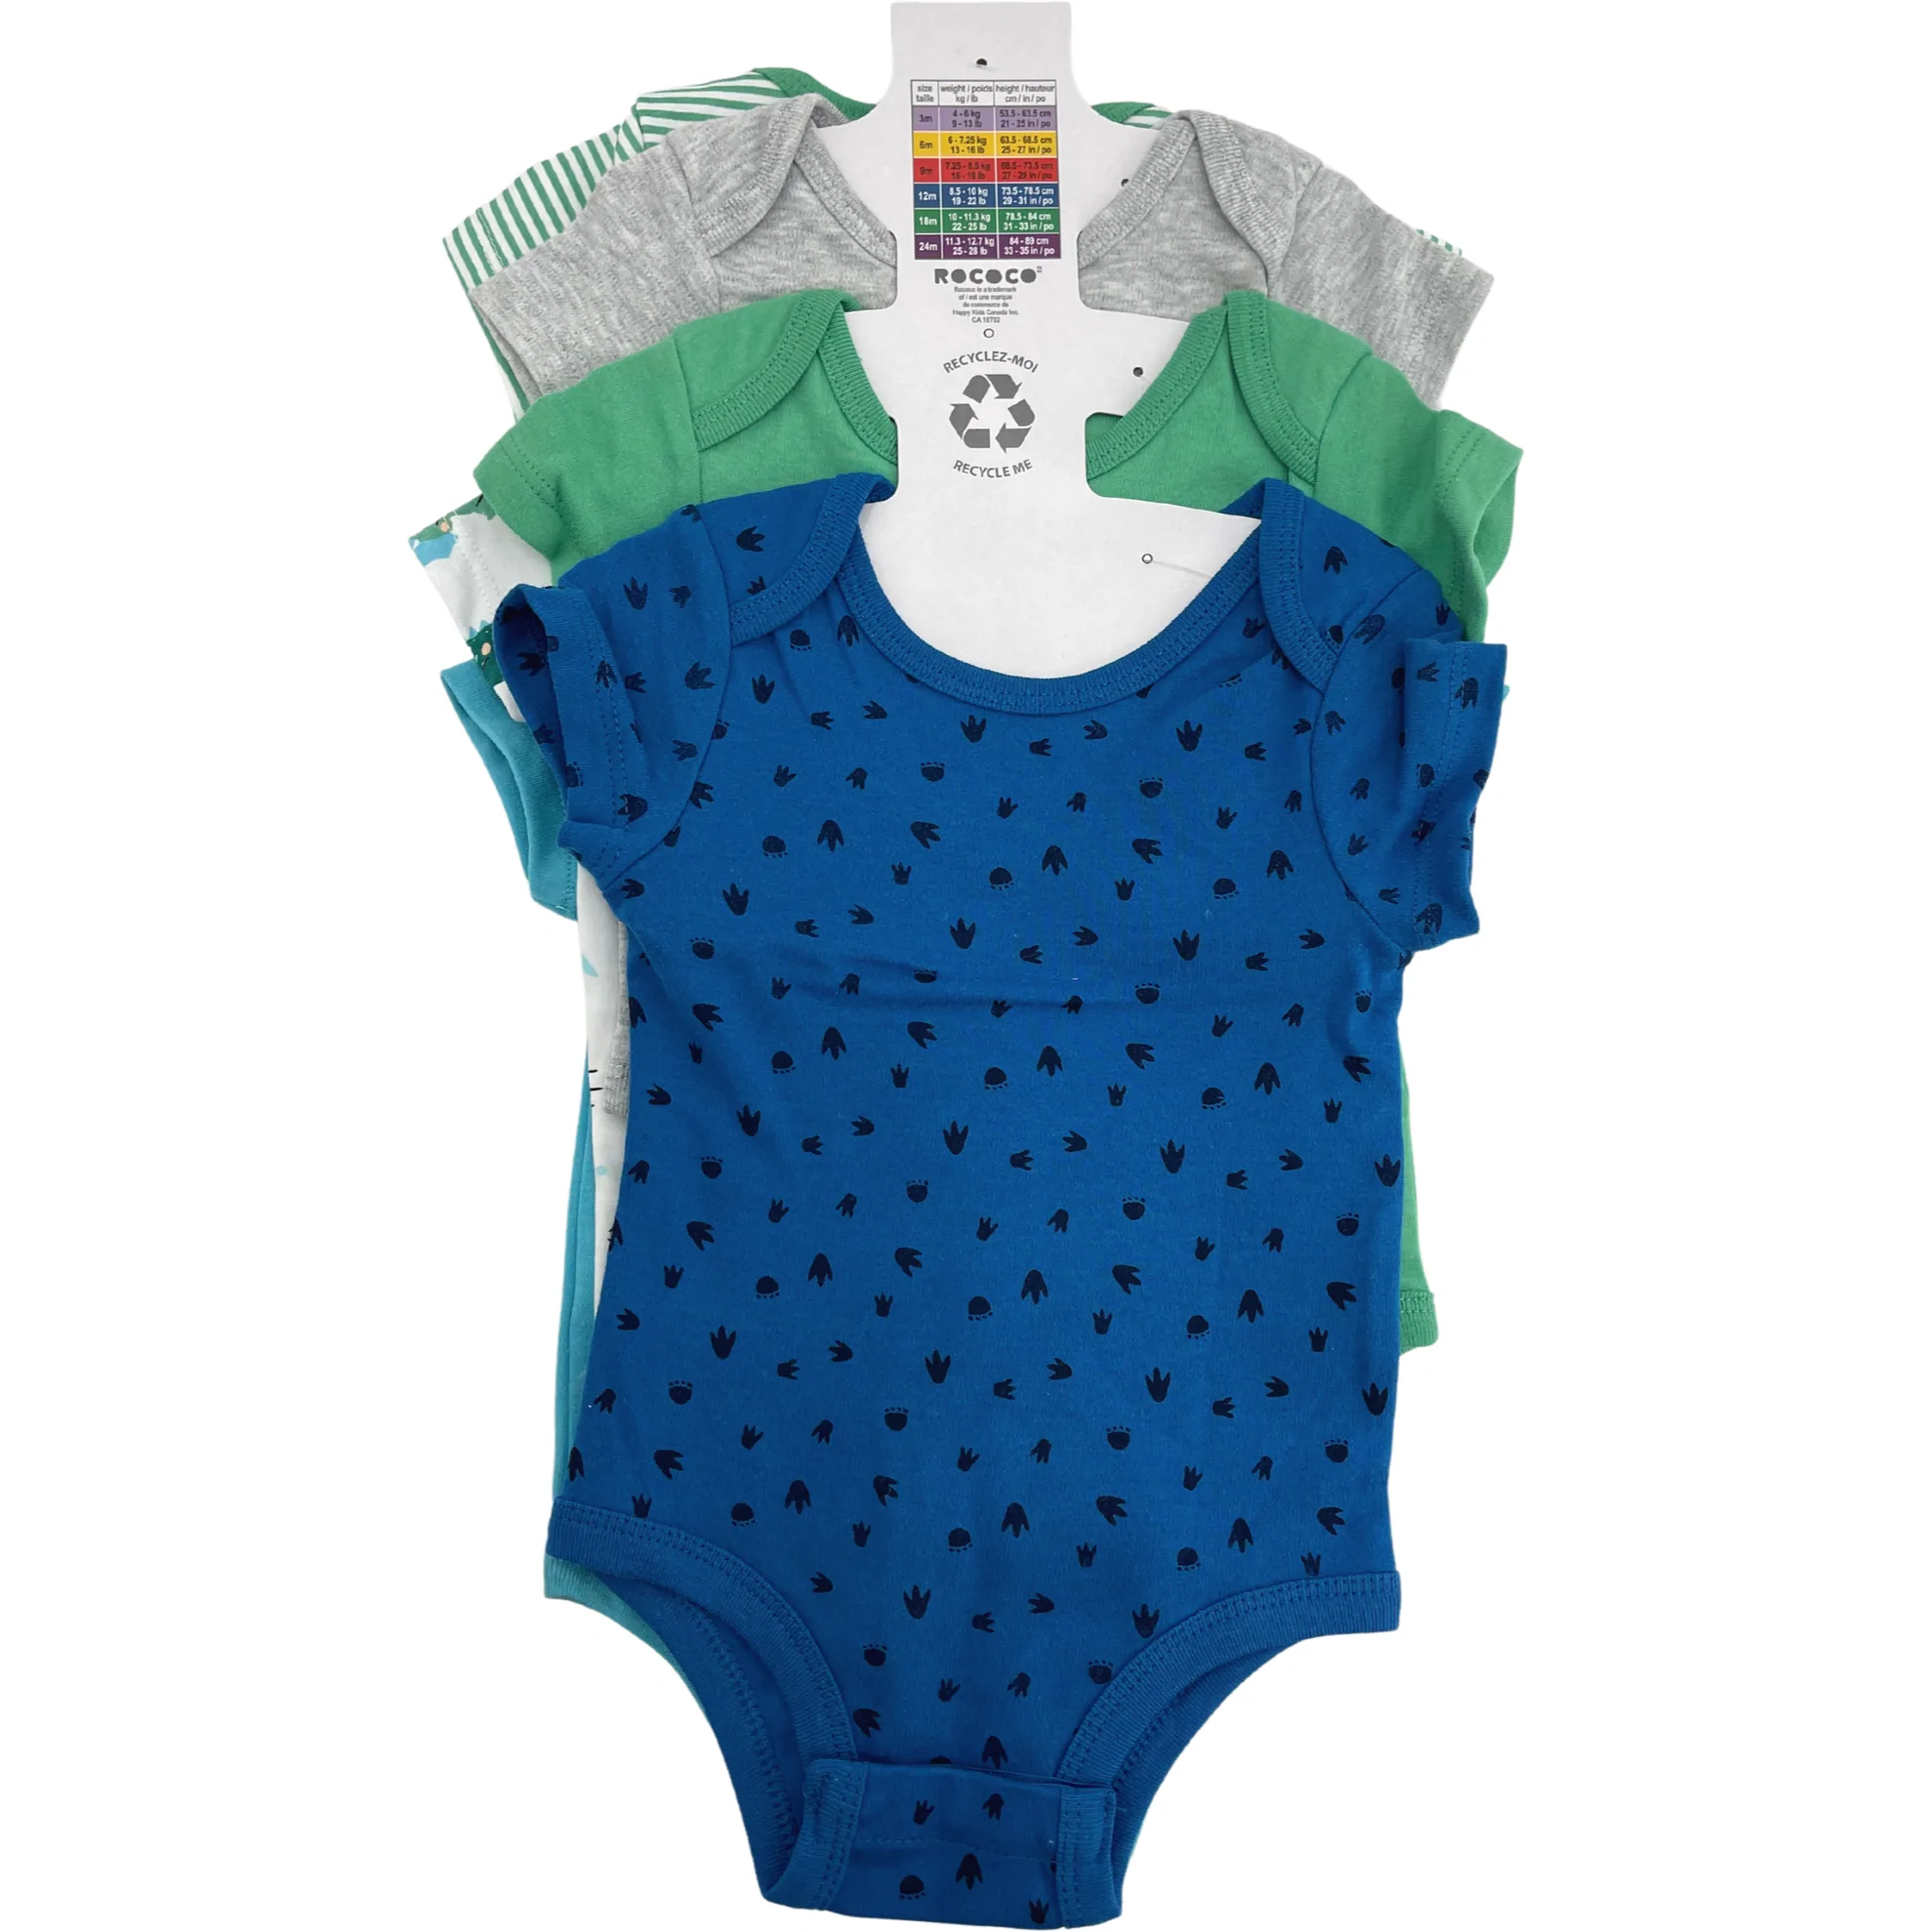 Rococo Infant Boy's Bodysuit Pack / 6 Pack / Green & Blue / Size 9 Months